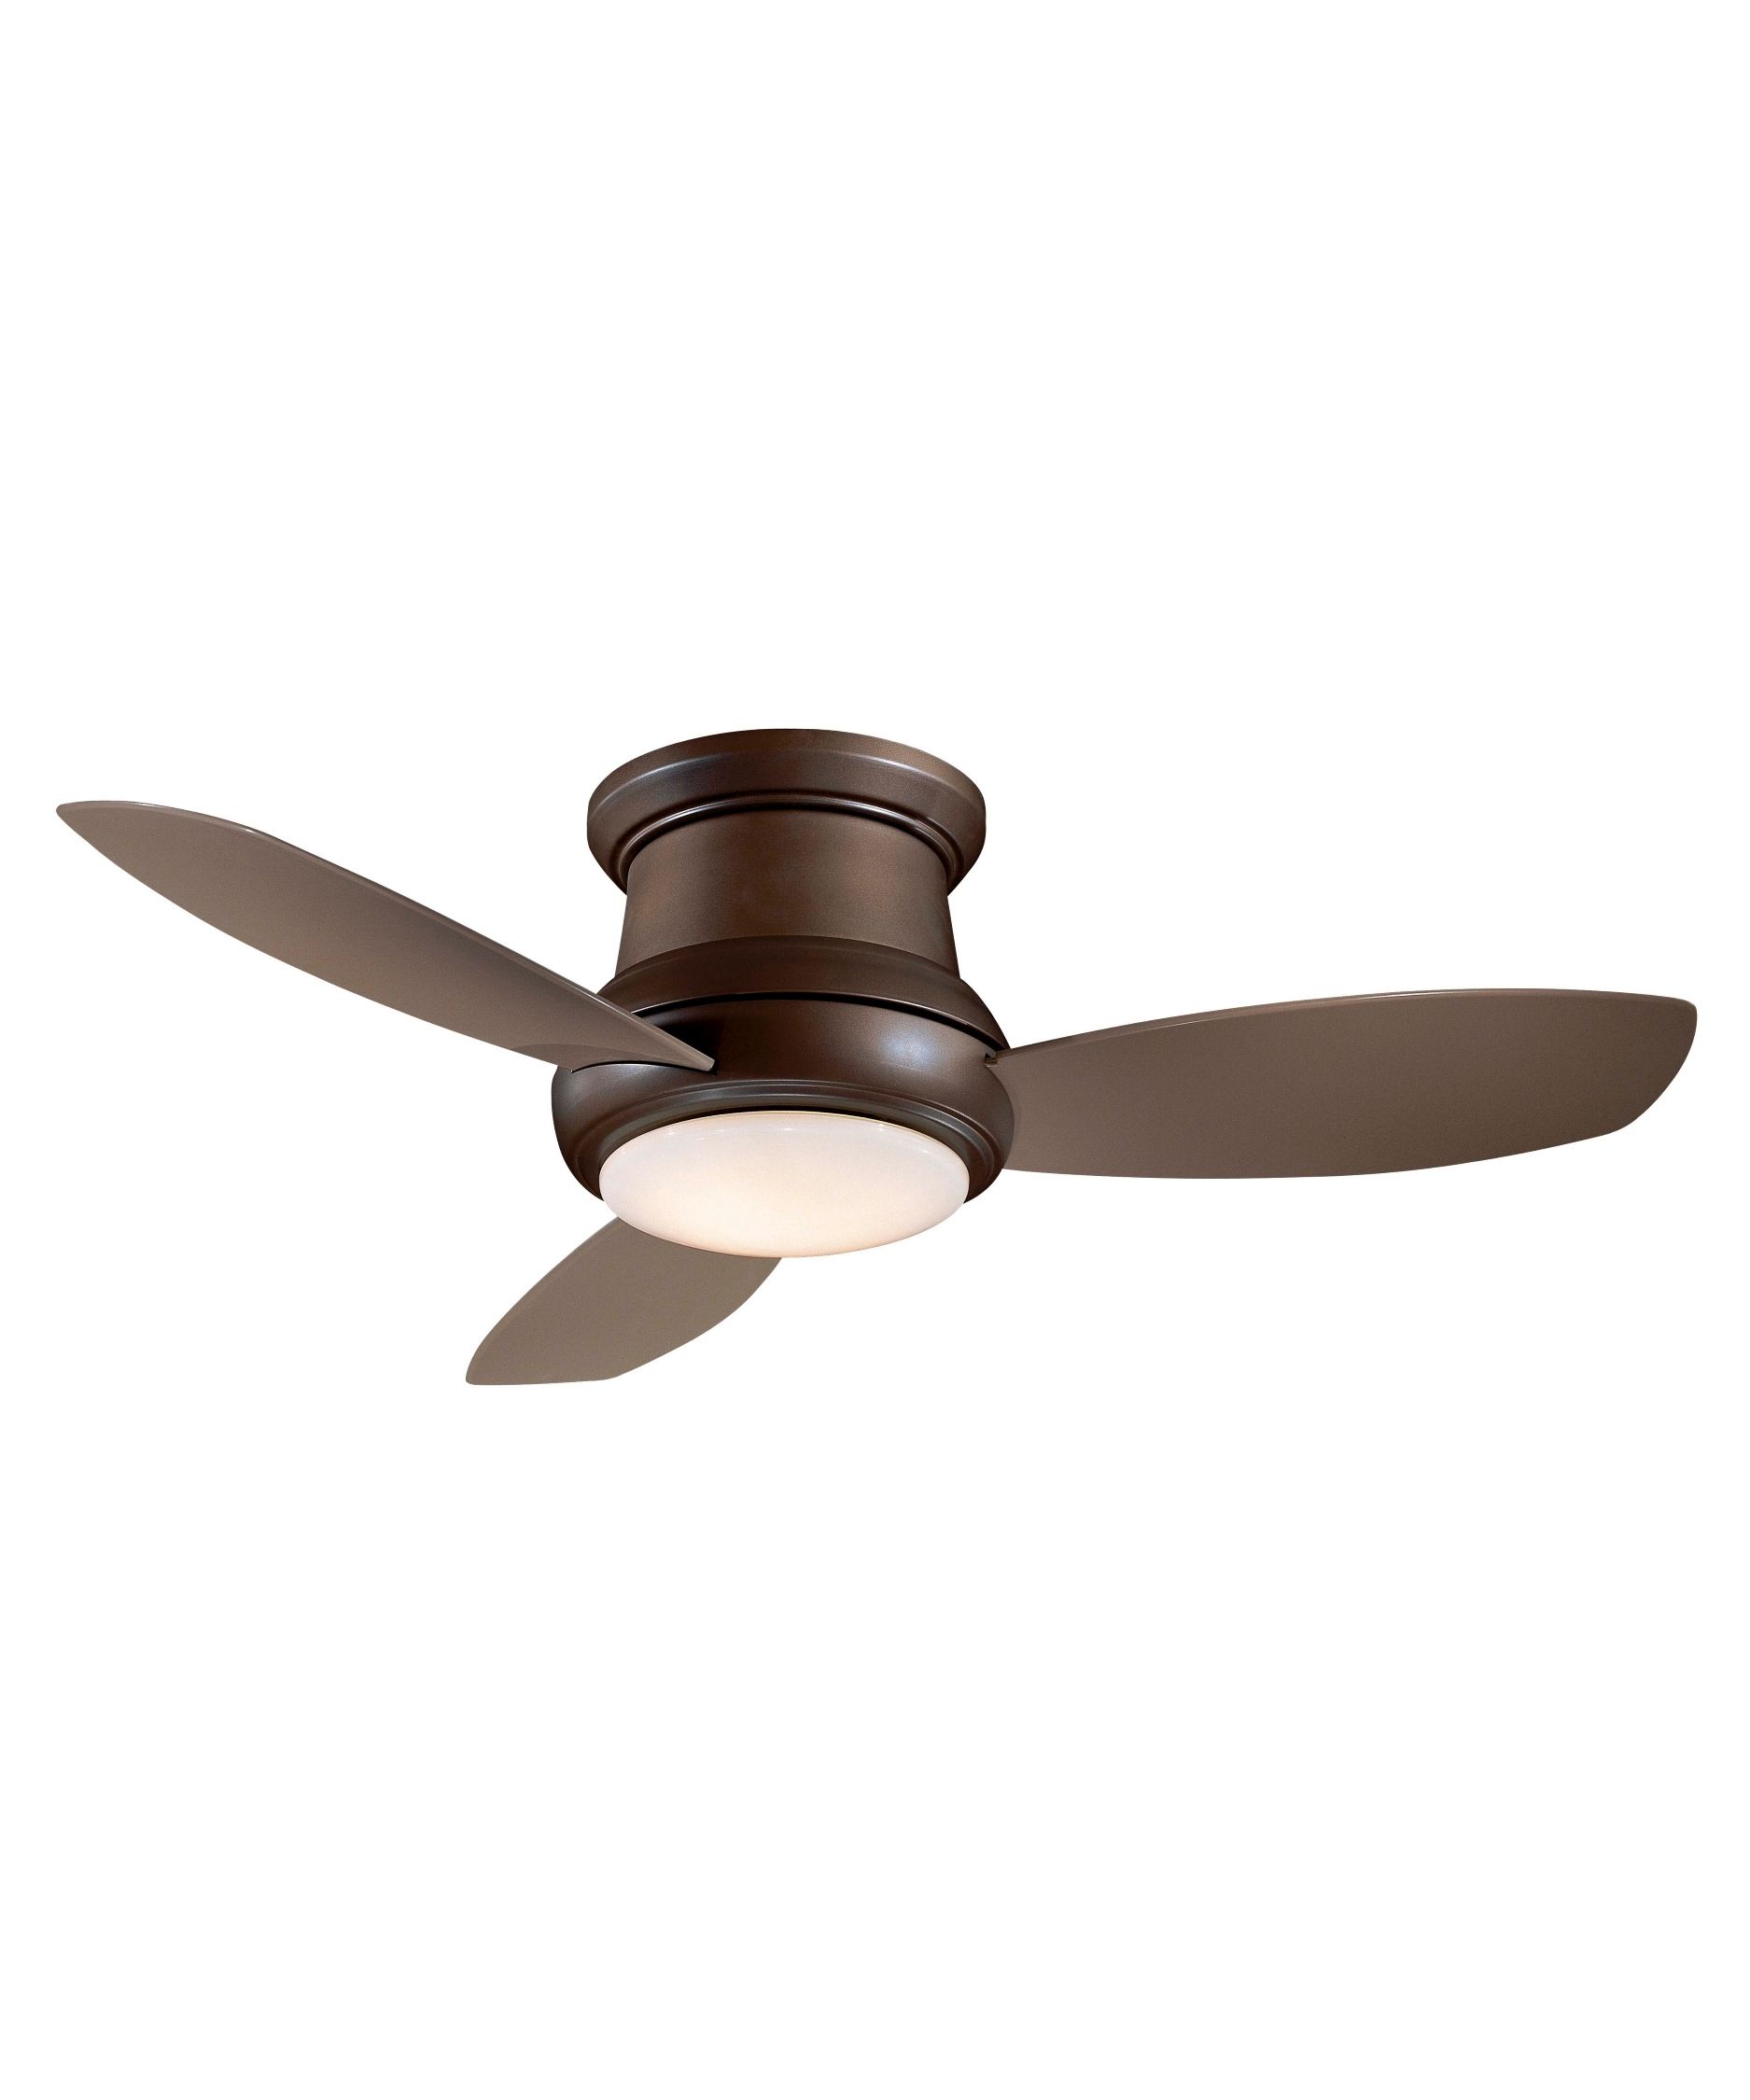 Brown Outdoor Ceiling Fan With Light For Fashionable Outdoor Ceiling Fans With Light – Pixball (View 20 of 20)